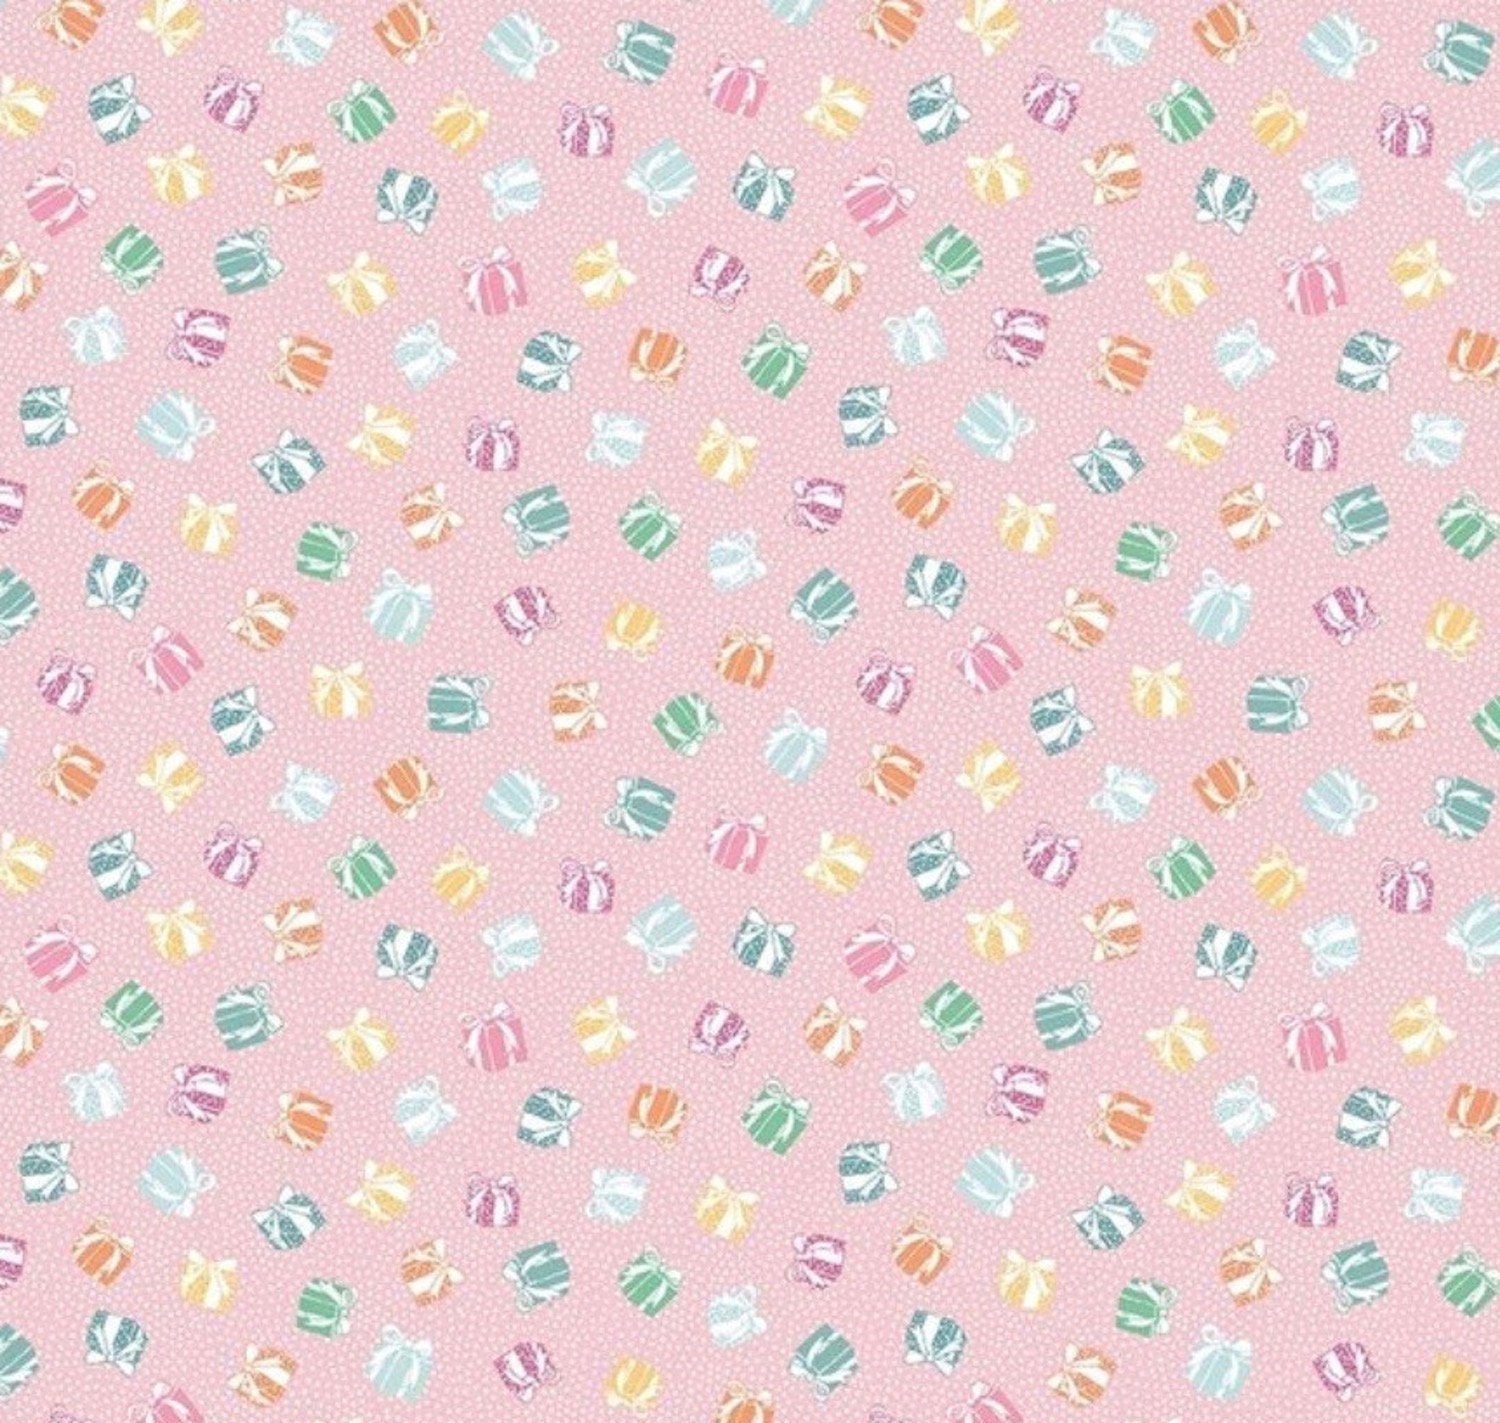 Pink Perfect Party Present - Riley Blake Fabric - COTTON Fabric, Apparel  Fabric, Birthday Fabric, Baby Shower Fabric, Cute Fabric Prints C10